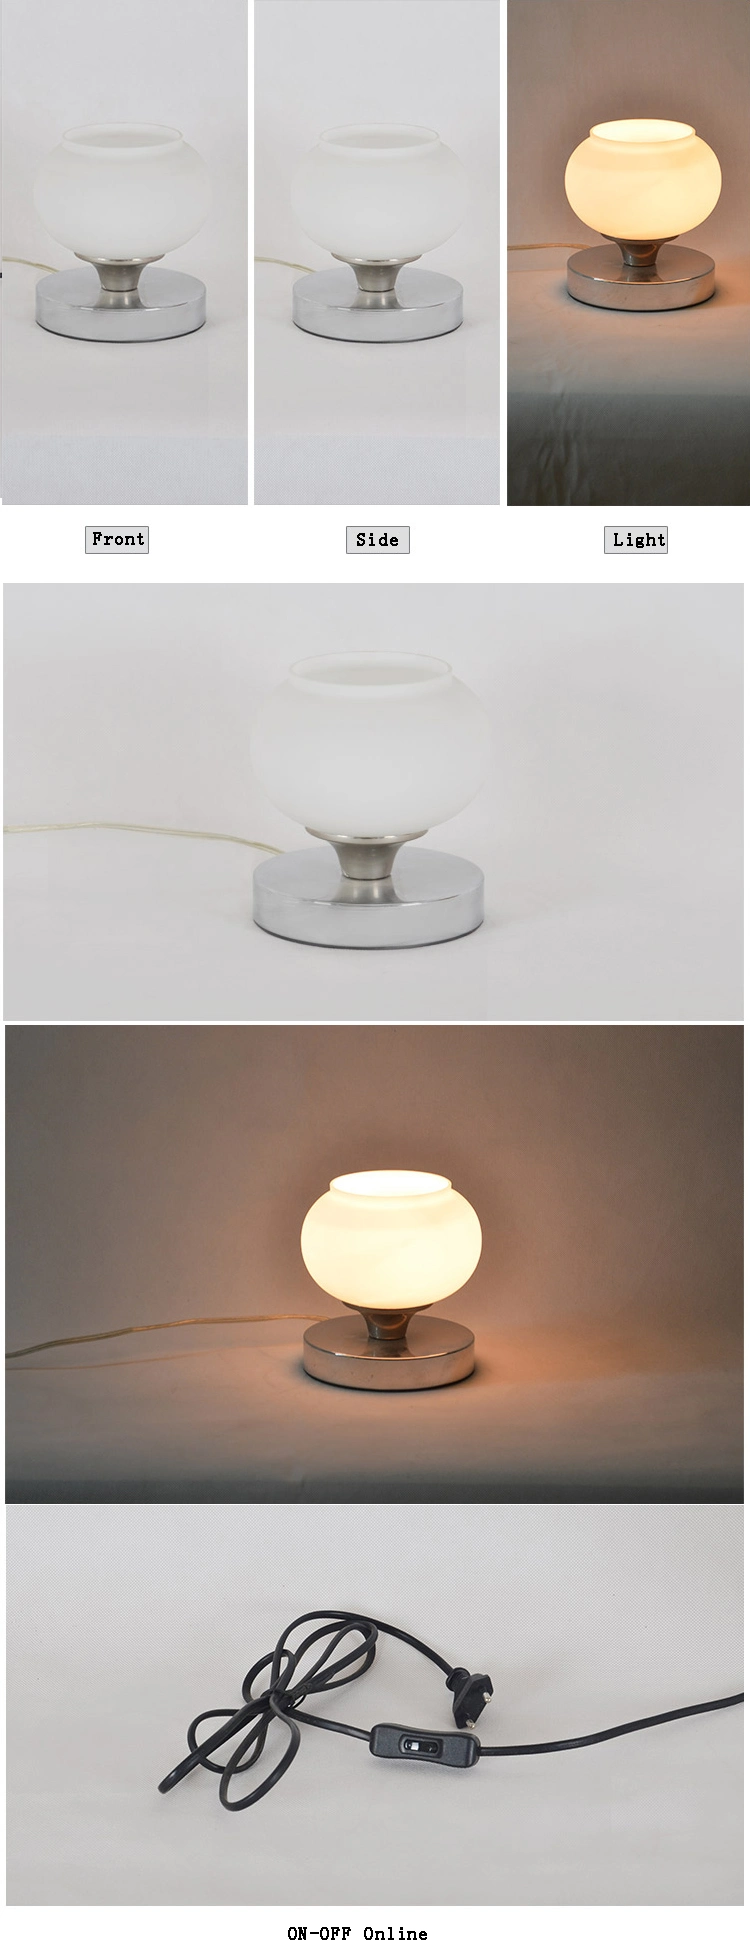 Aluminium Decorative Table Lamp Hotel Table LED Light Lamps with Glass Shade